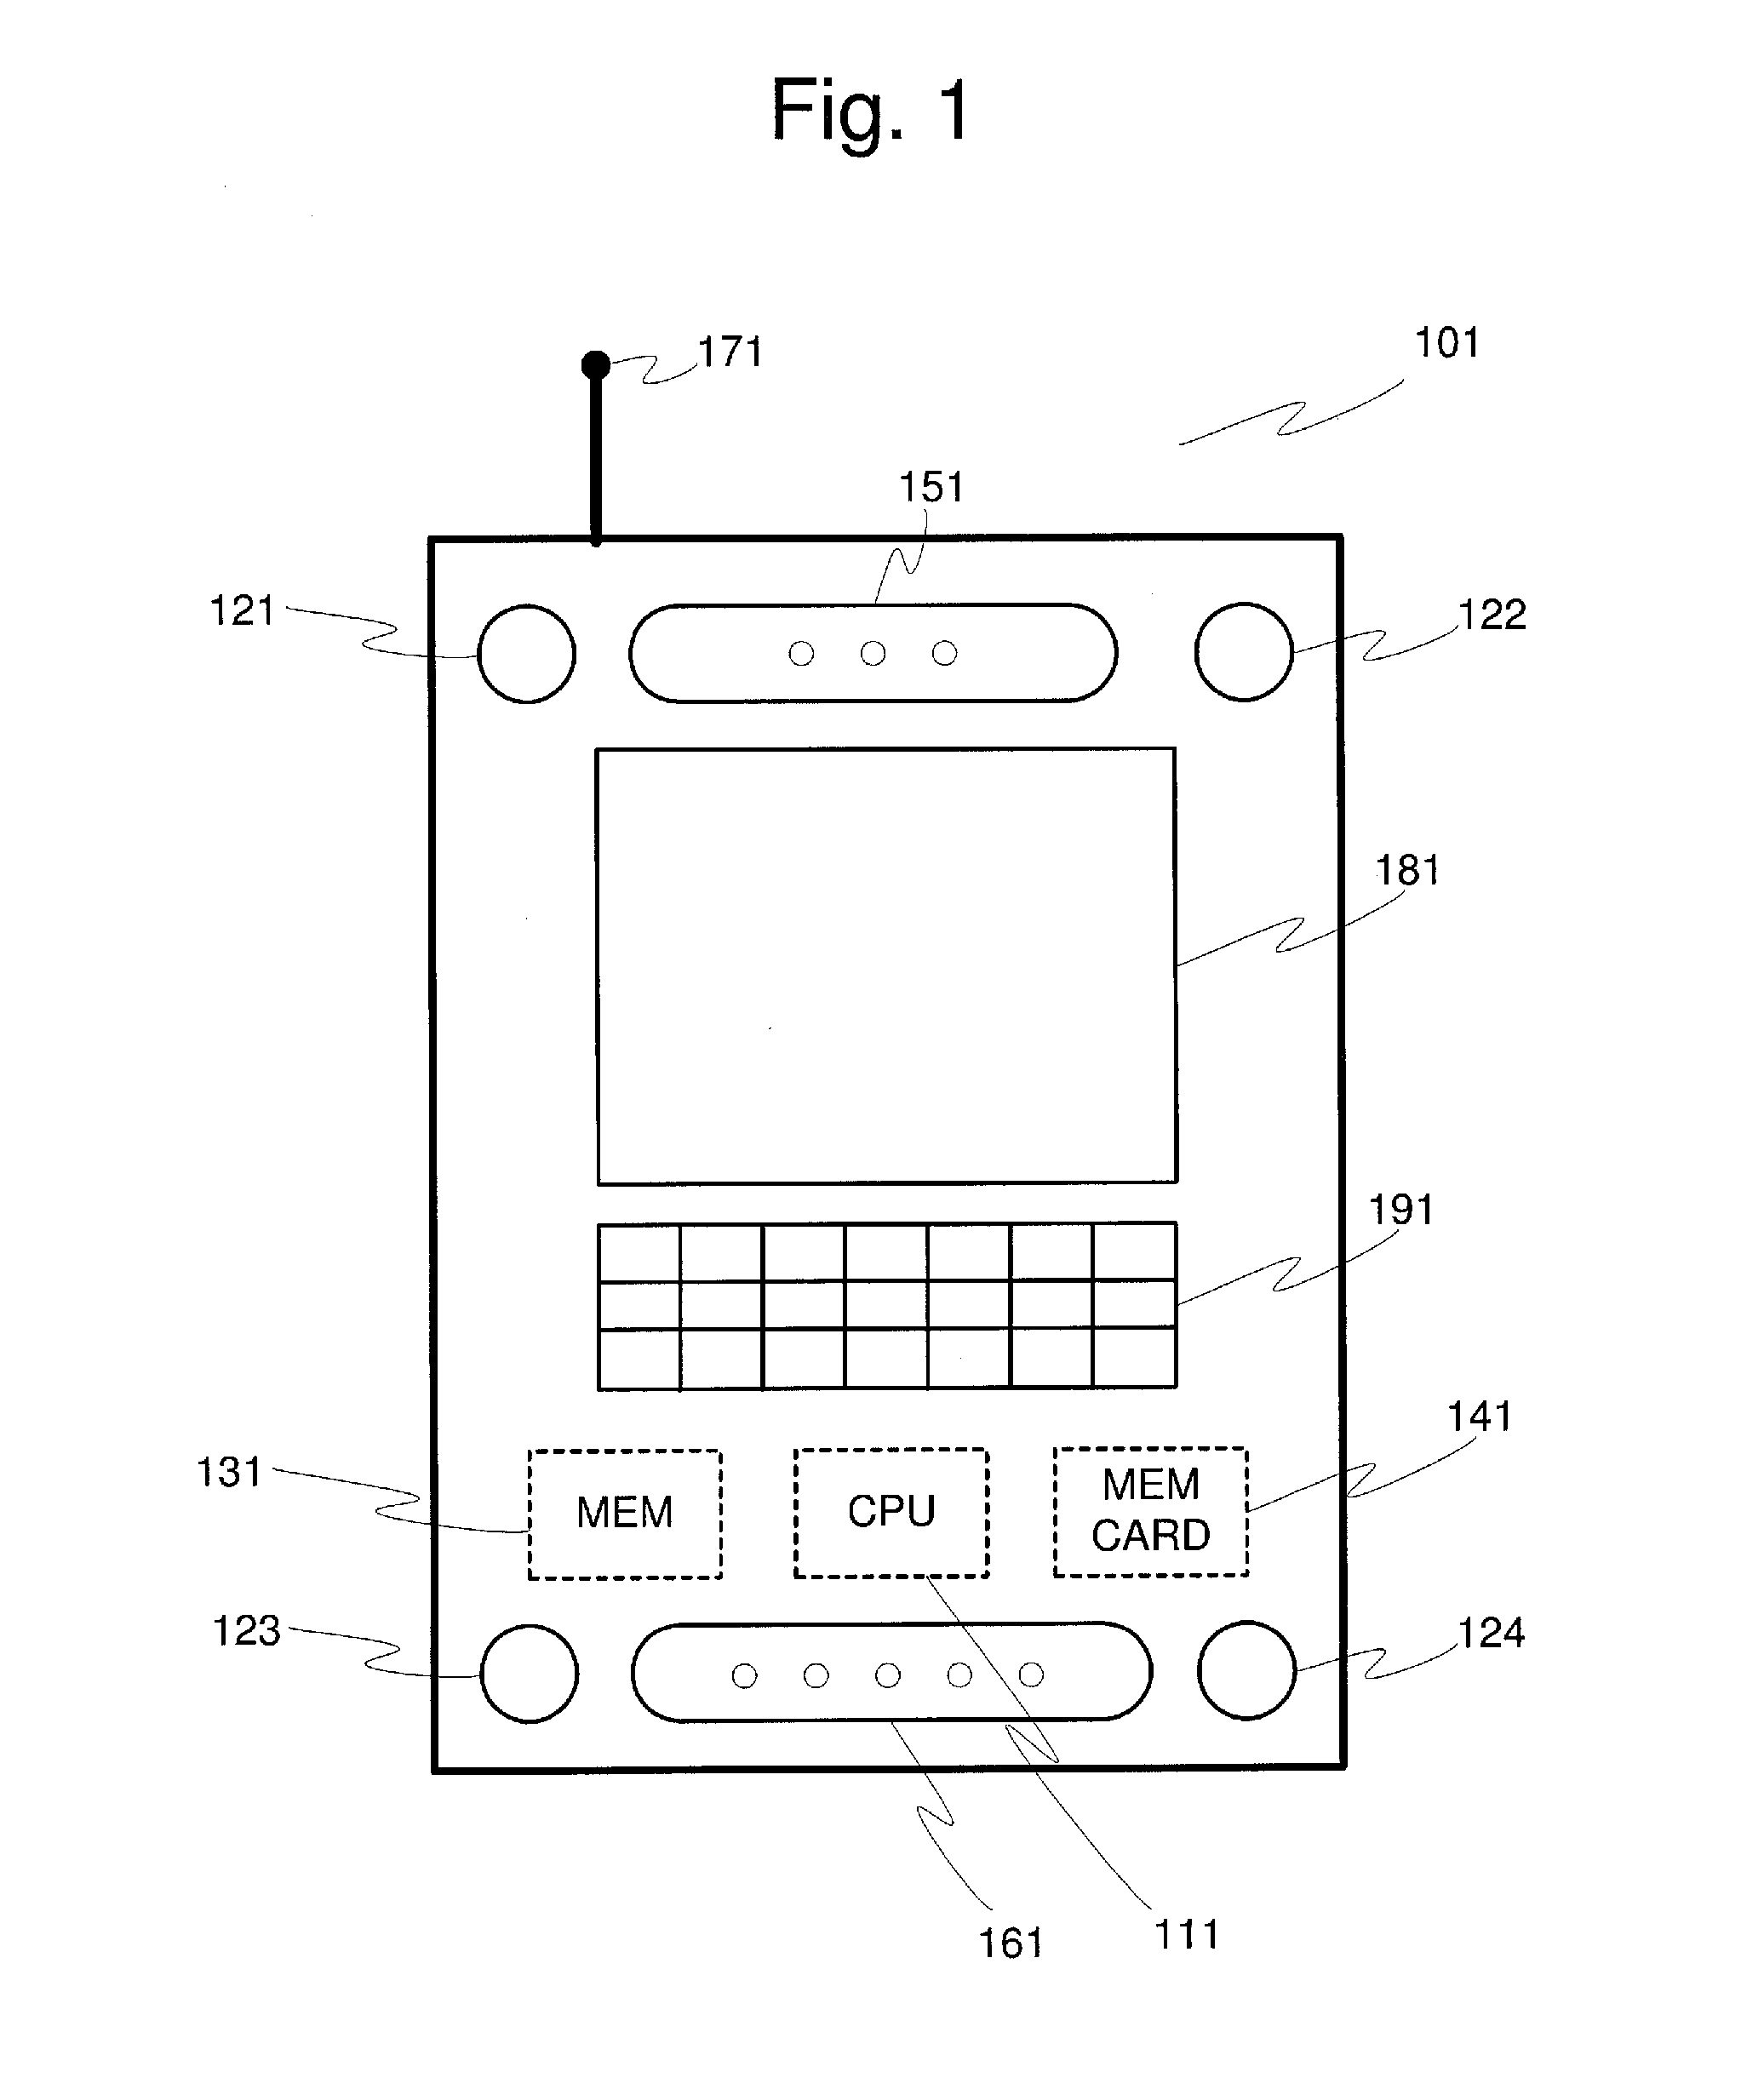 Method and System for Correlating User/Device Activity with Spatial Orientation Sensors